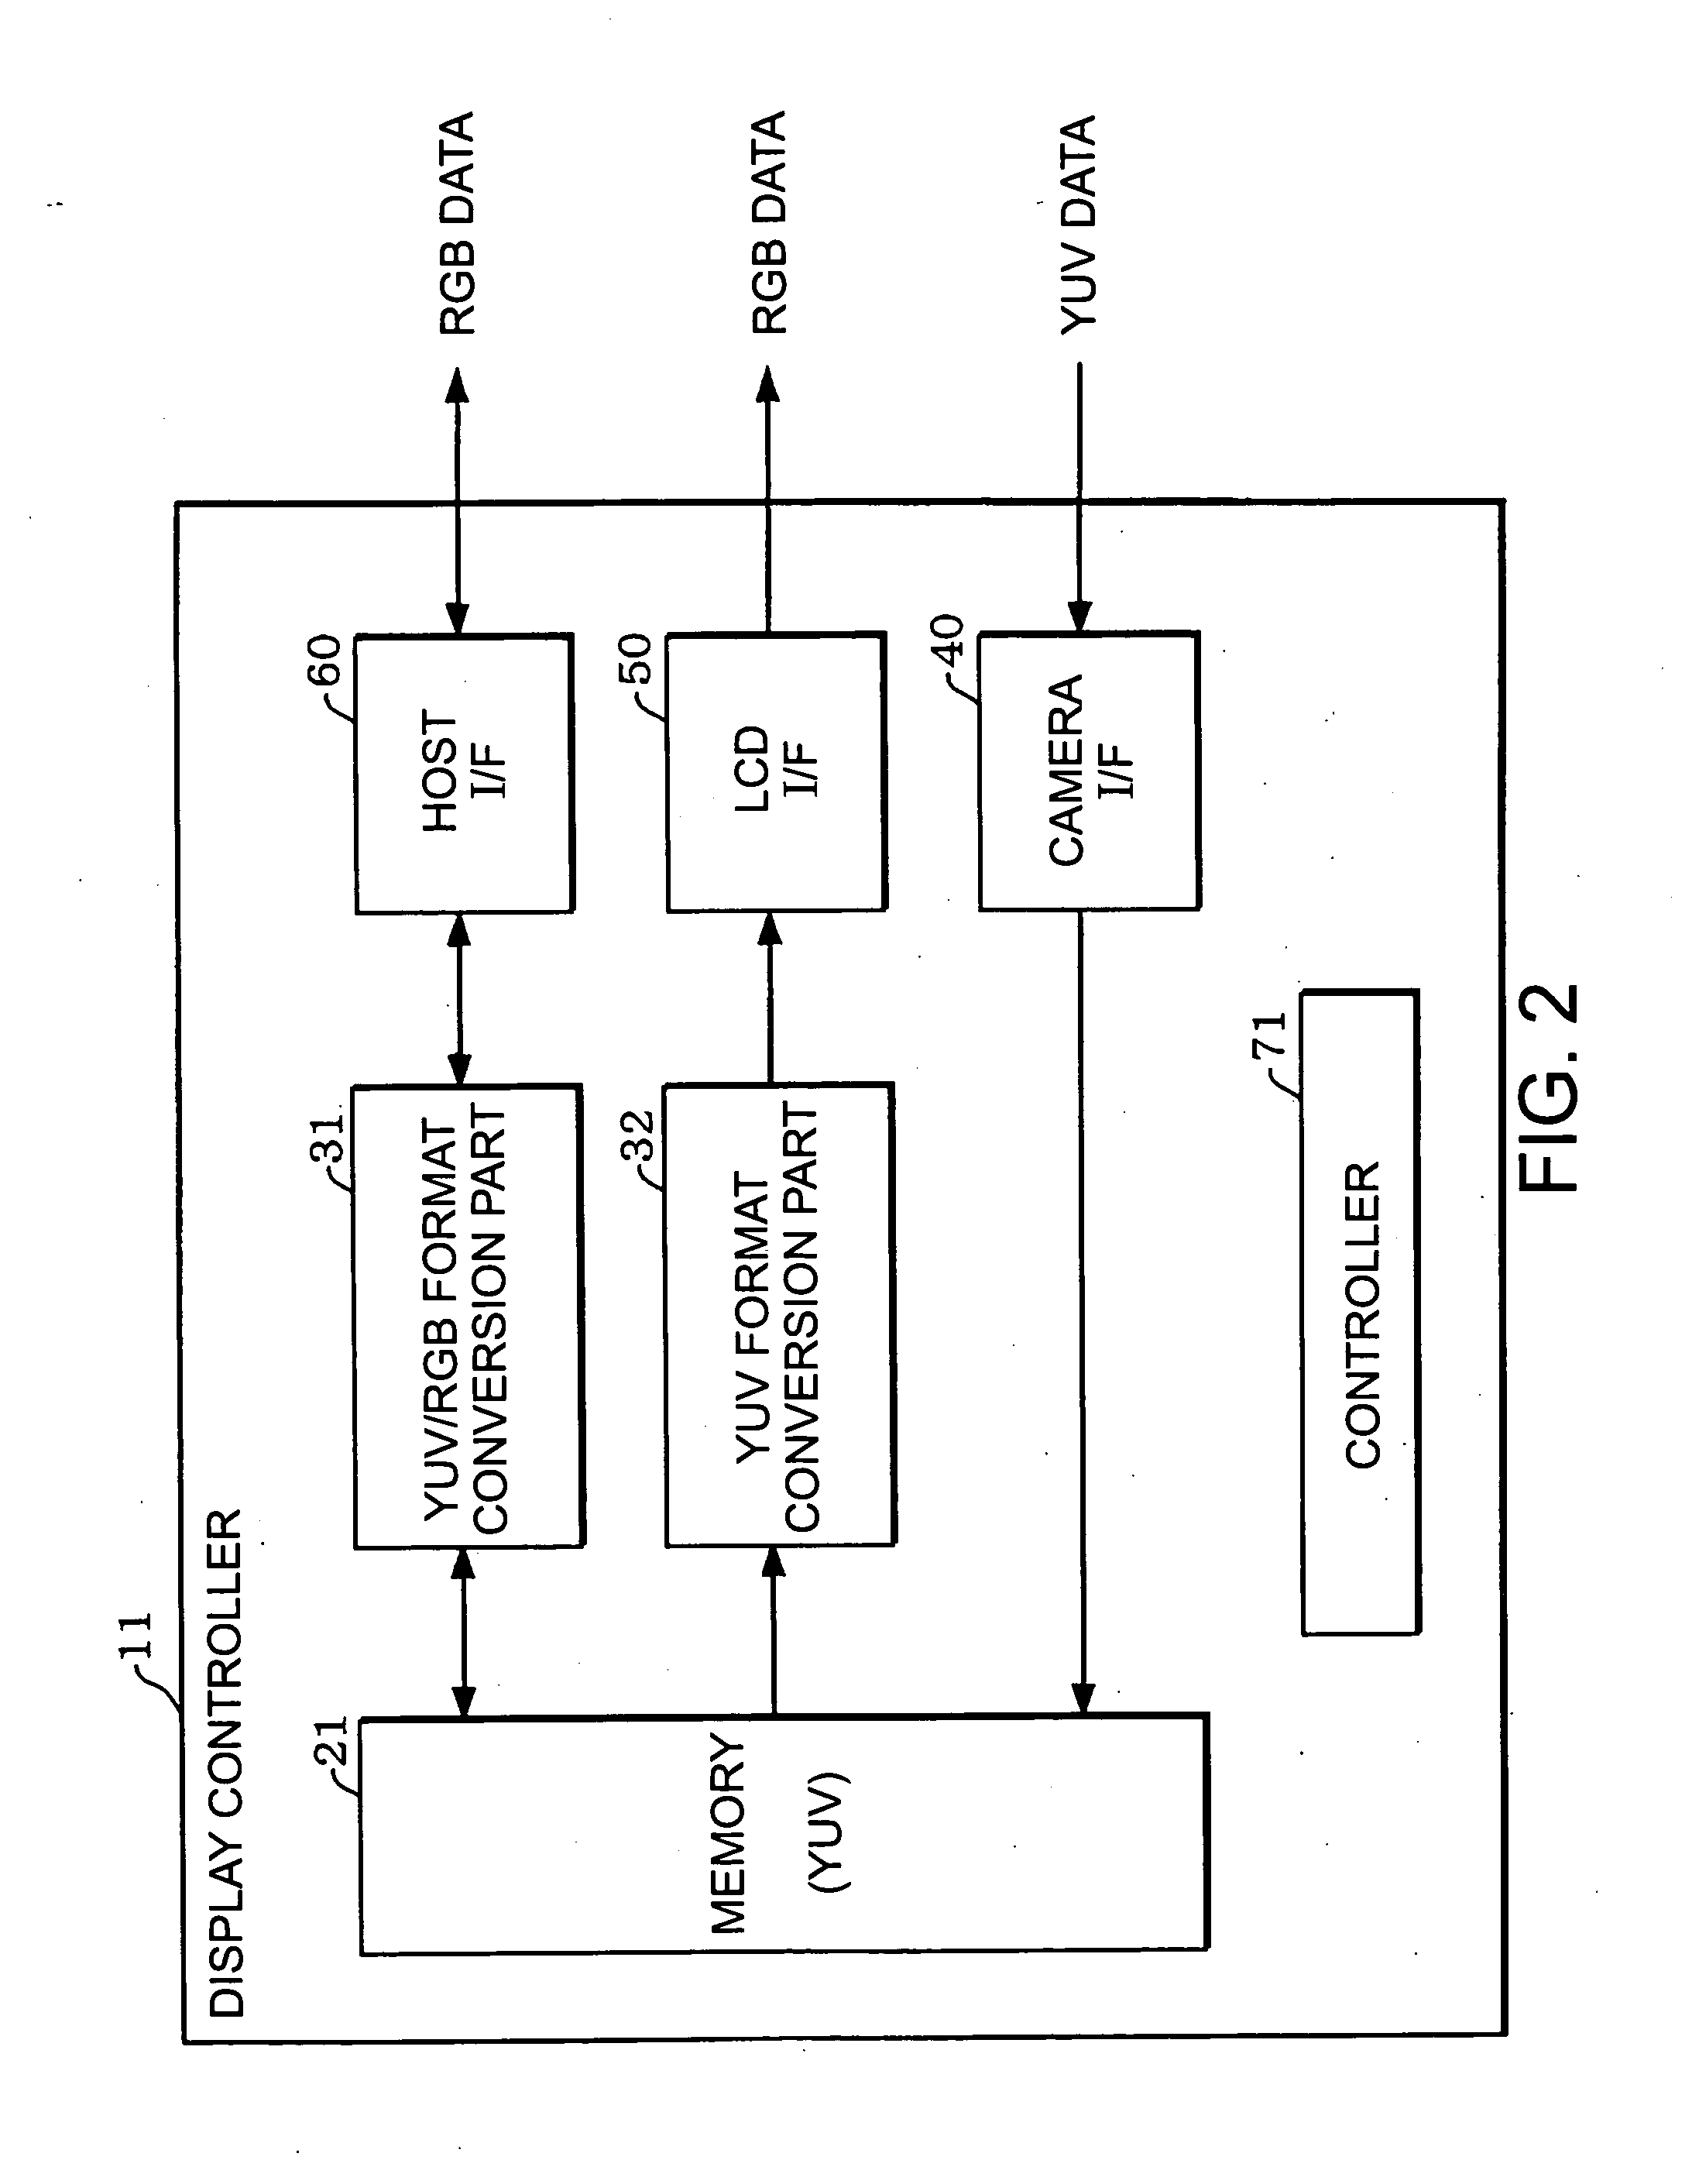 Display controller, electronic apparatus and method for supplying image data